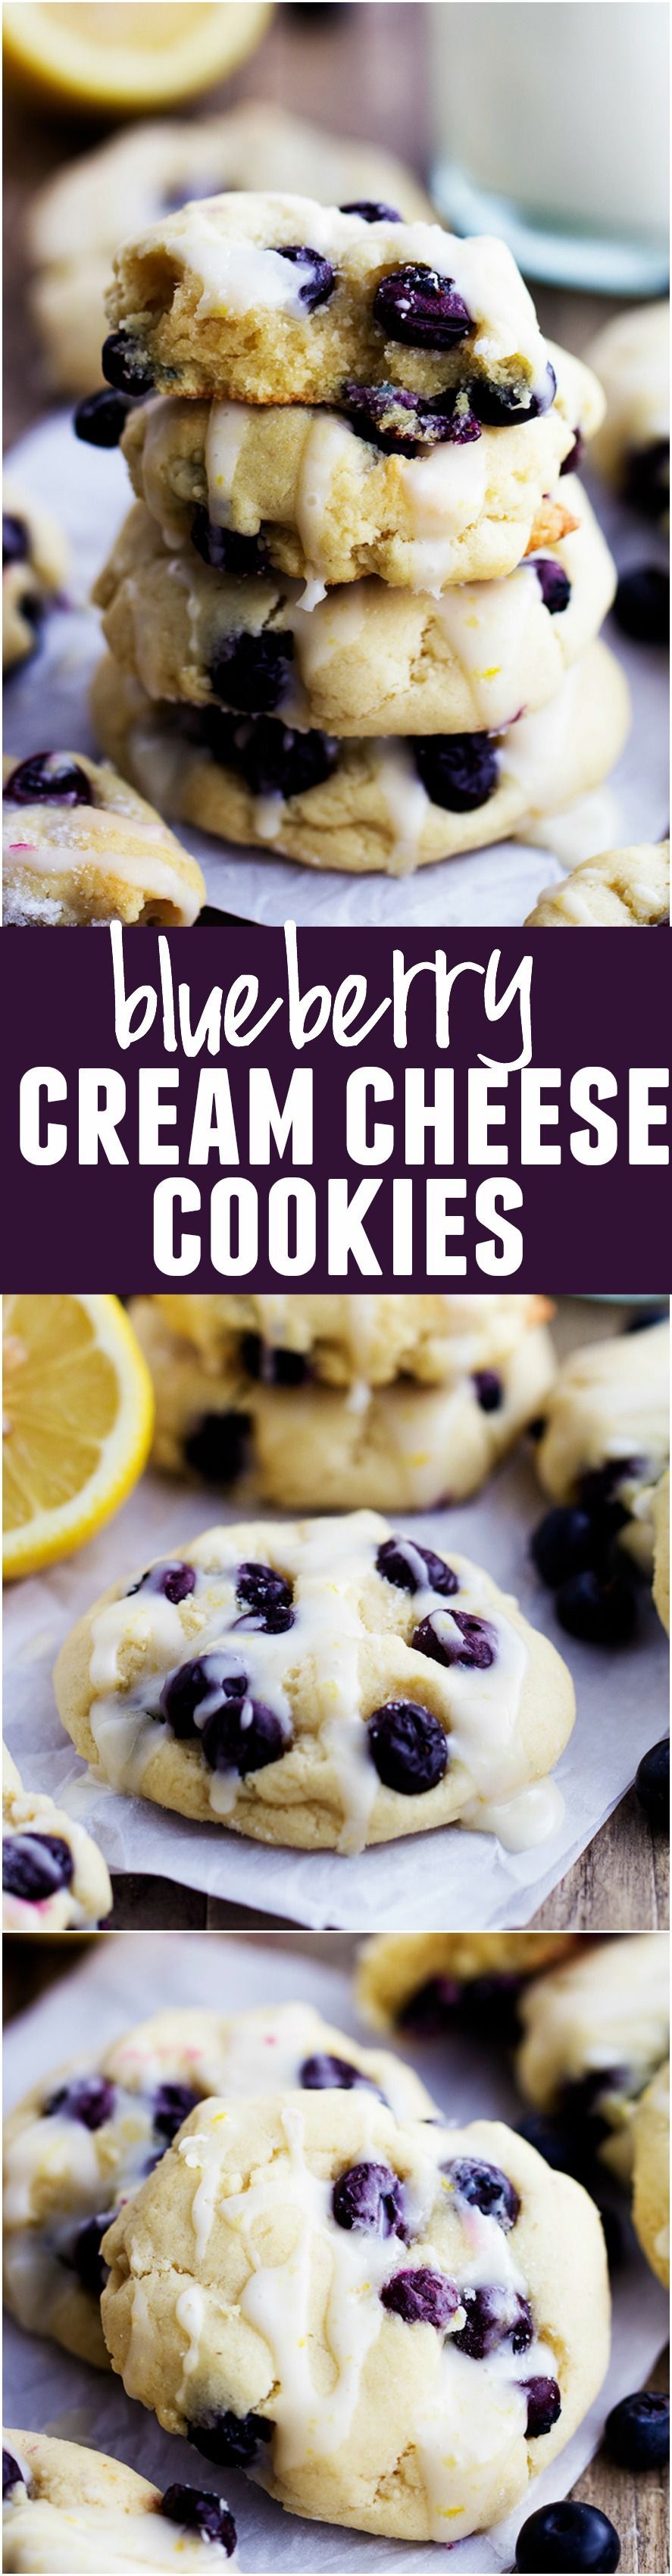 Perfect moist and puffy cookies with fresh blueberries bursting inside. These cookies are a mix between a blueberry muffin and a